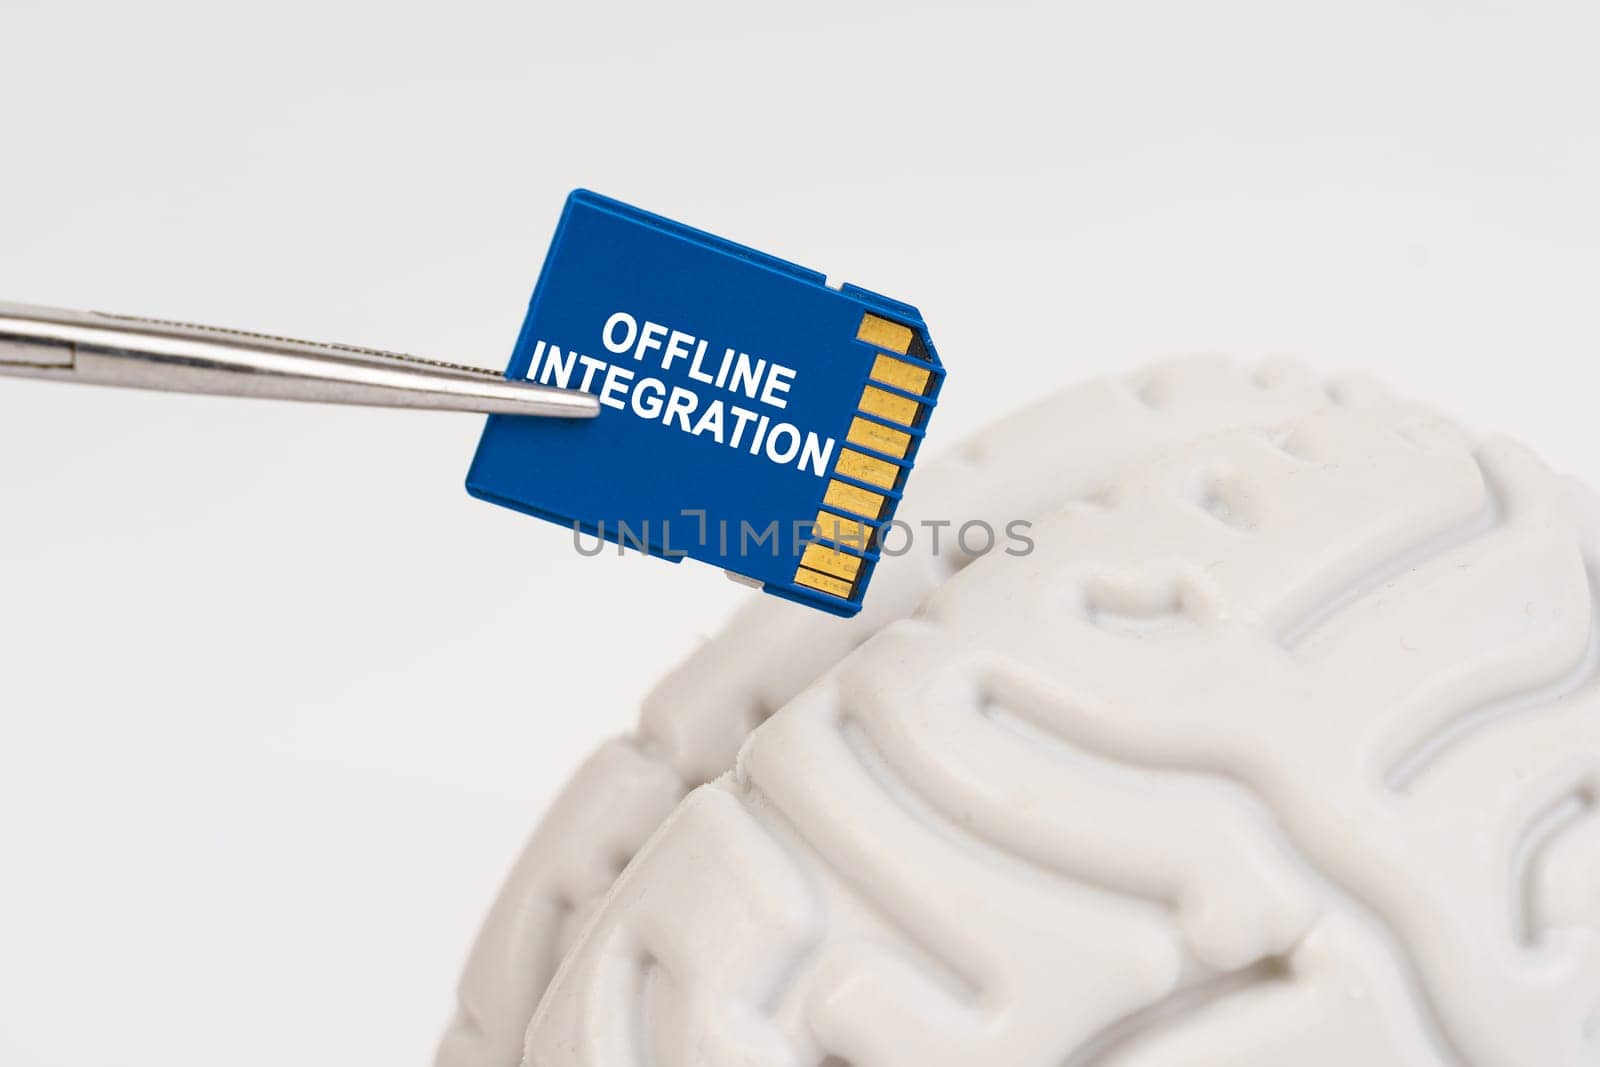 A man inserts a memory card into his brain with the inscription - Offline Integration by Sd28DimoN_1976